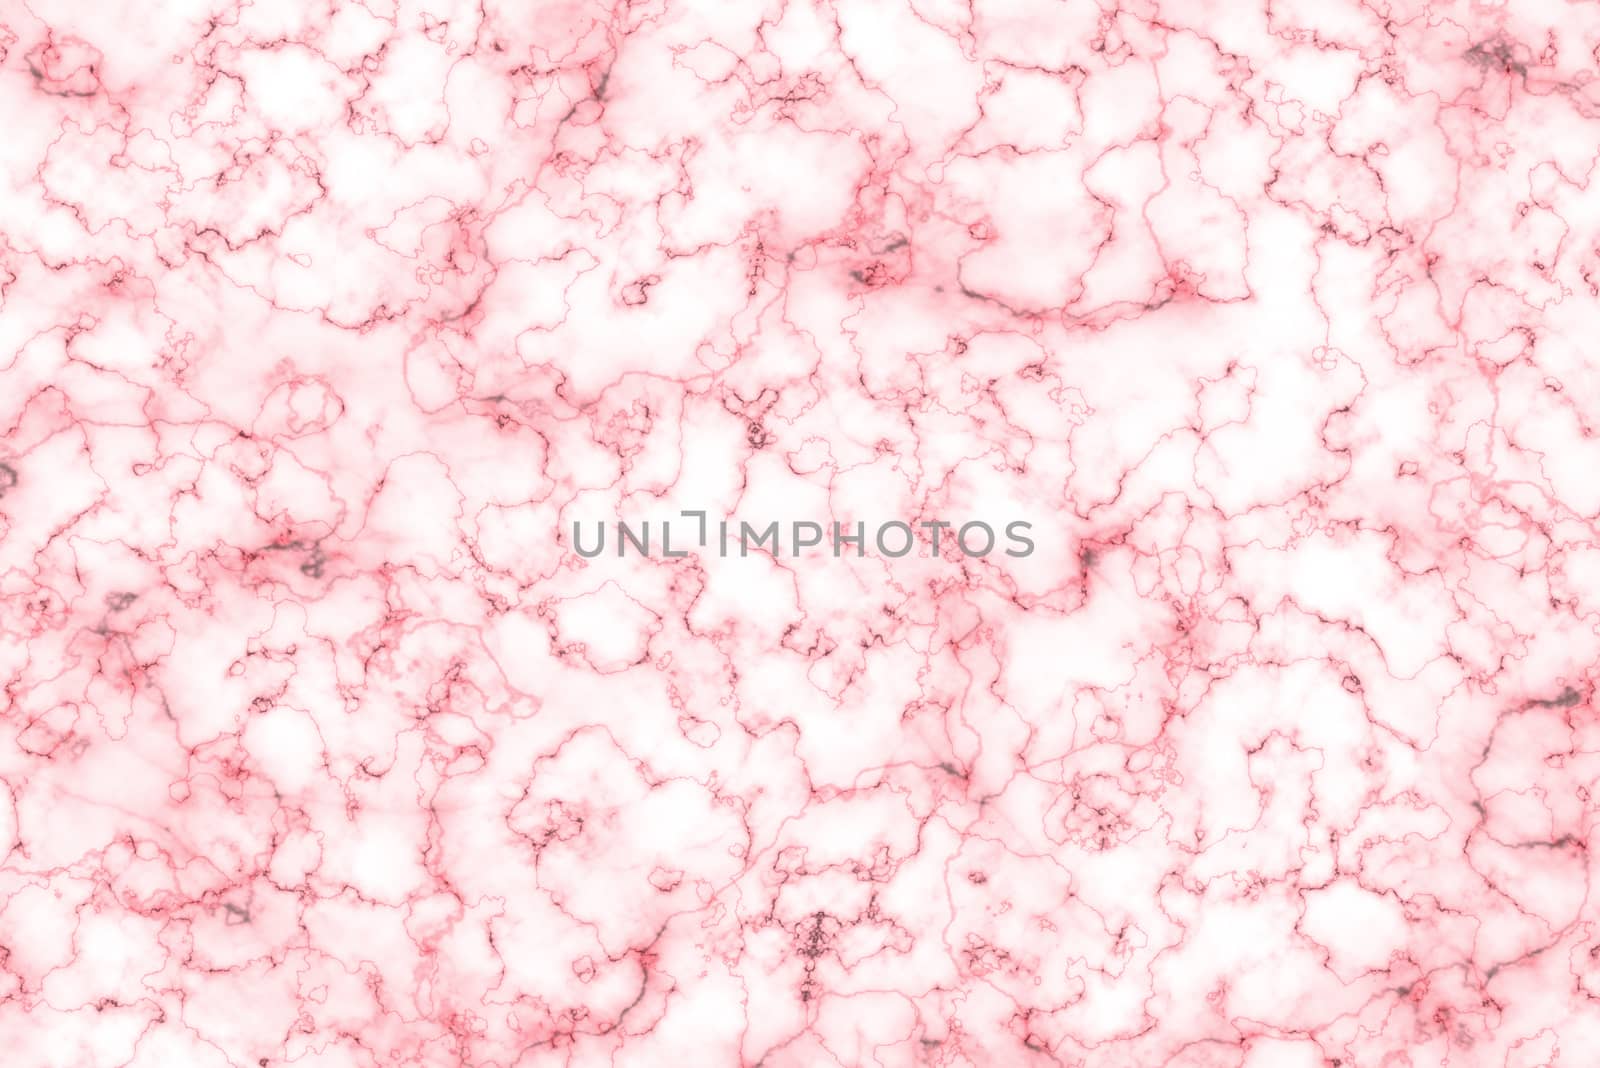 Pink marble abstract background and texture for pattern or product design